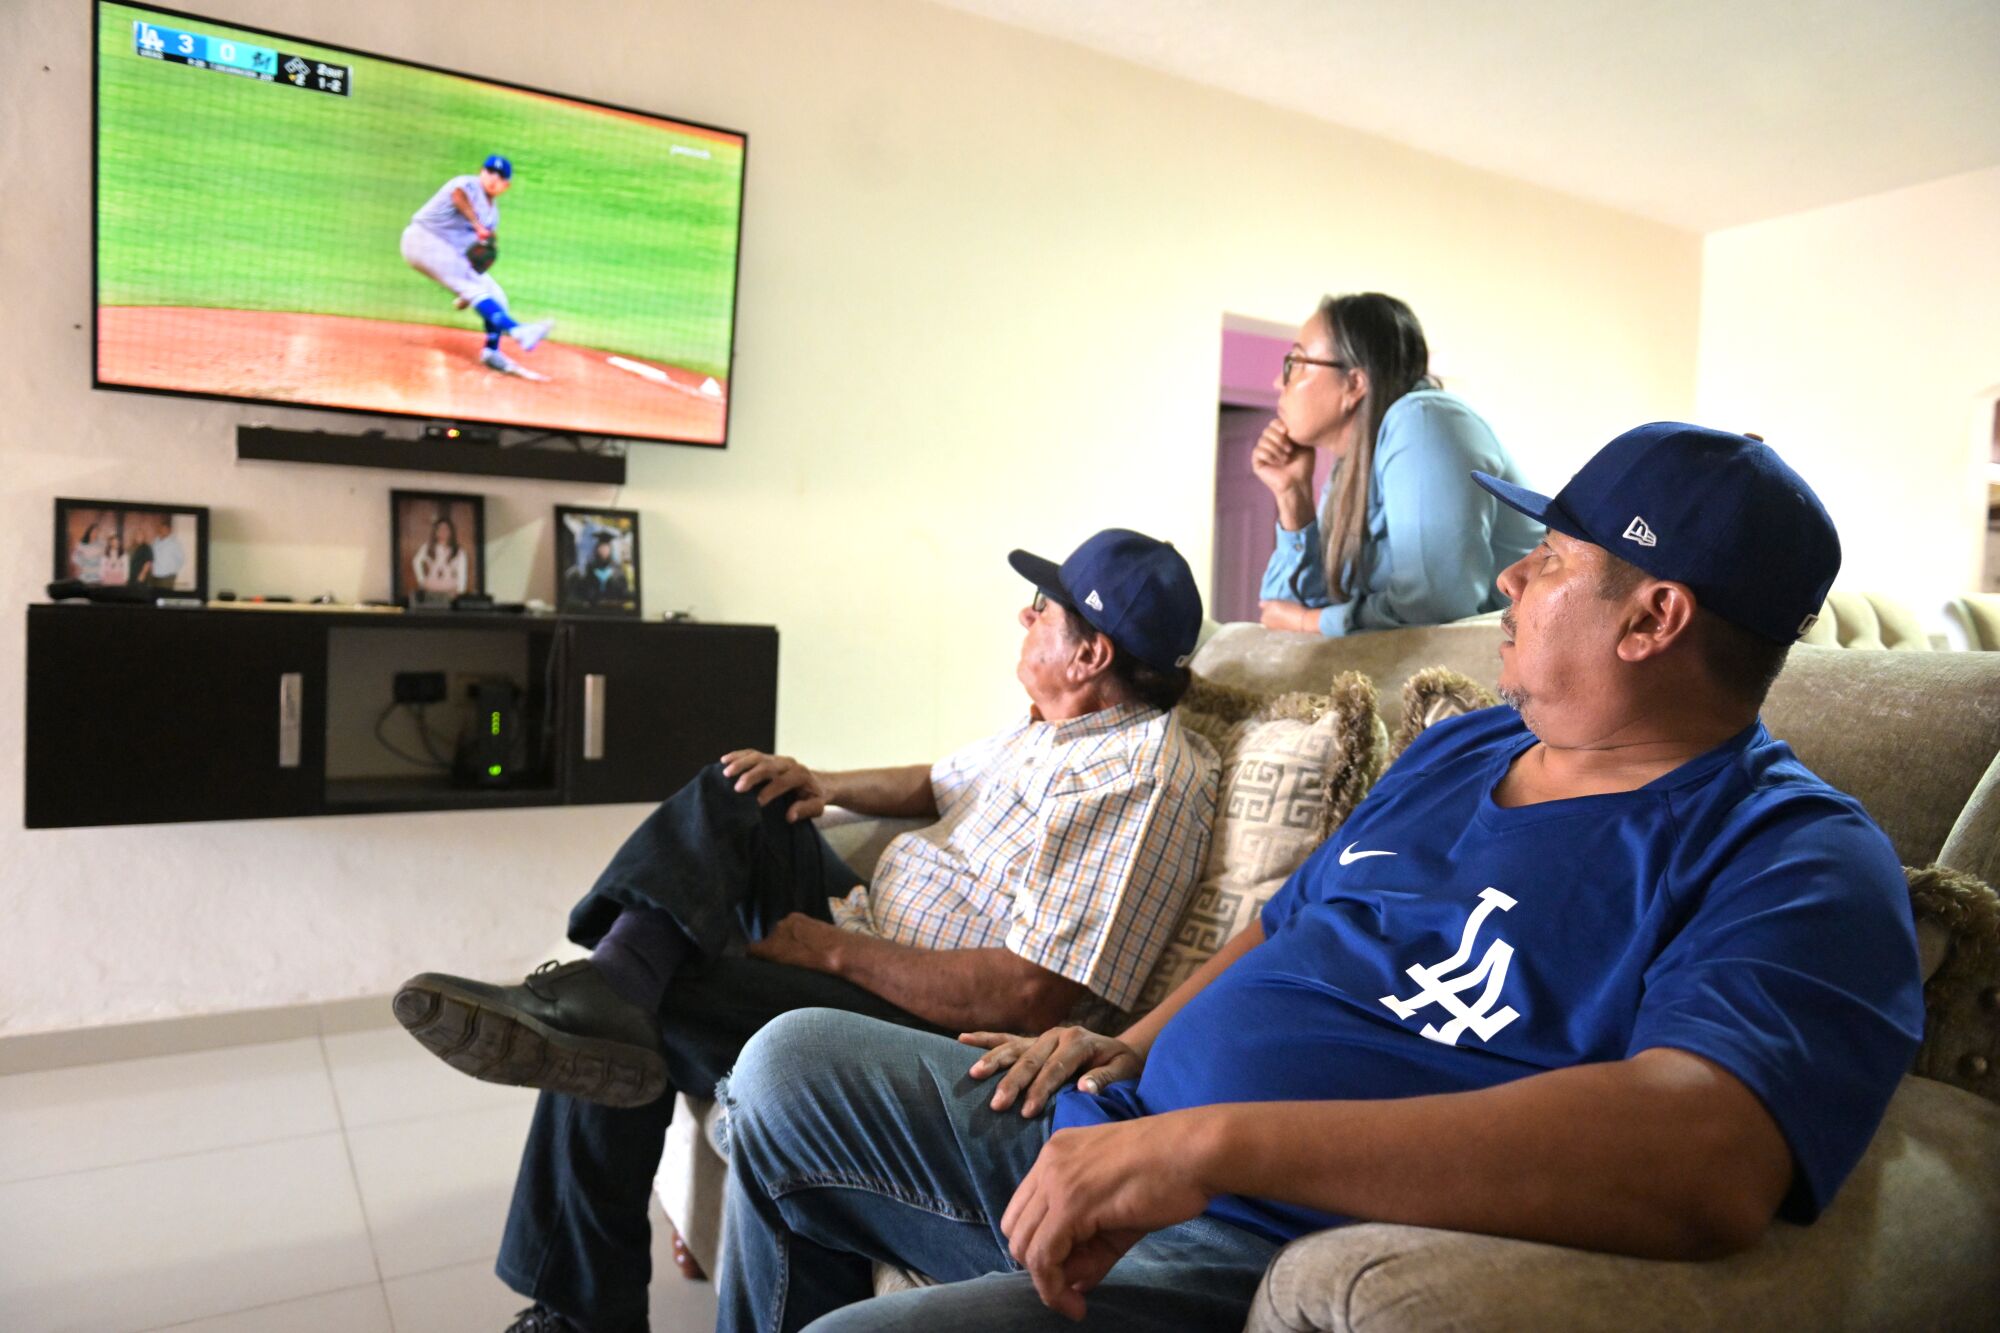 From his home in Culiacán, Mexico, Carlos Urías, right, watches his son Julio pitch for the Dodgers in Miami on Aug. 28.